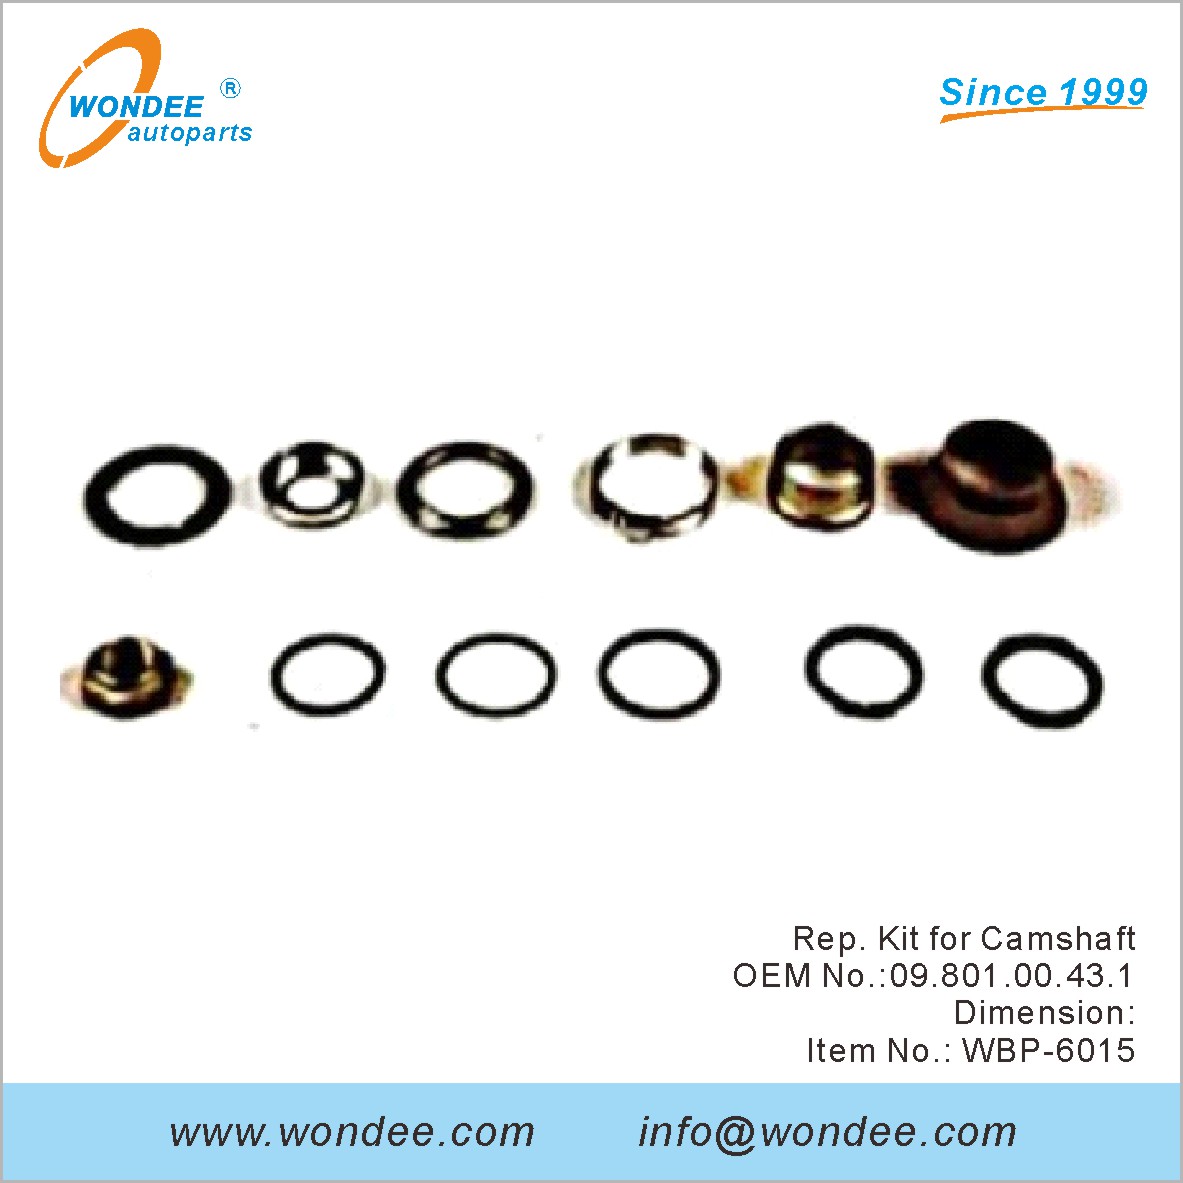 Rep Kit for Camshaft OEM 0980100431 for BPW from WONDEE